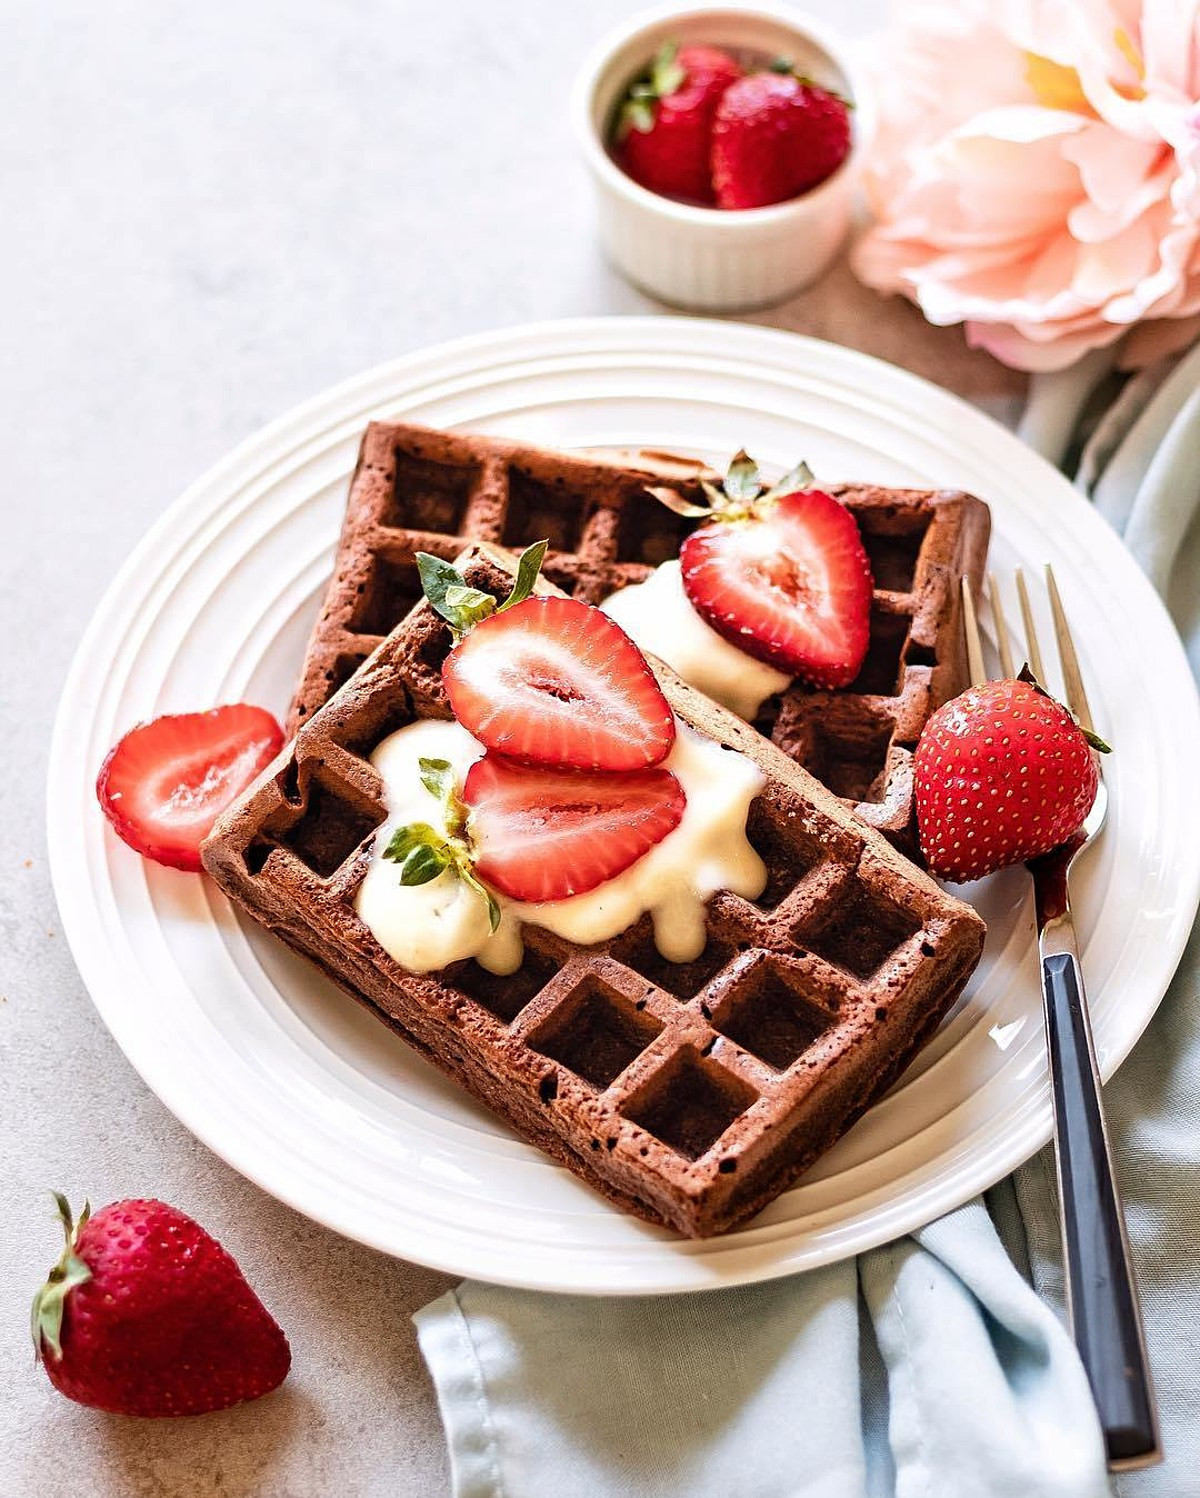 Healthy Vegan Waffles
 How to Make Healthy and Delicious Vegan Waffles For Your